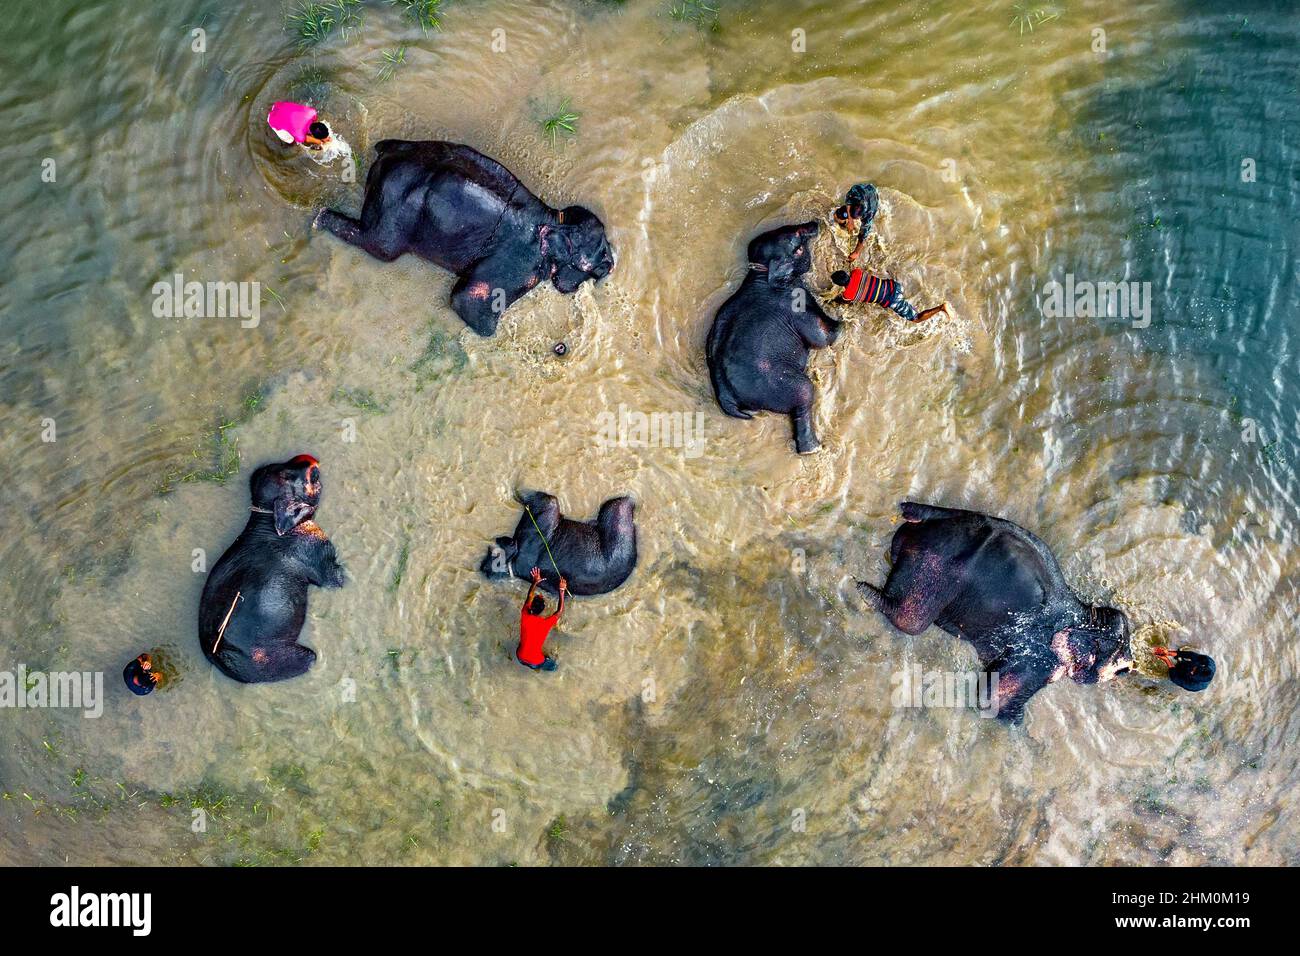 Circus elephants are bathing in murky river water Stock Photo